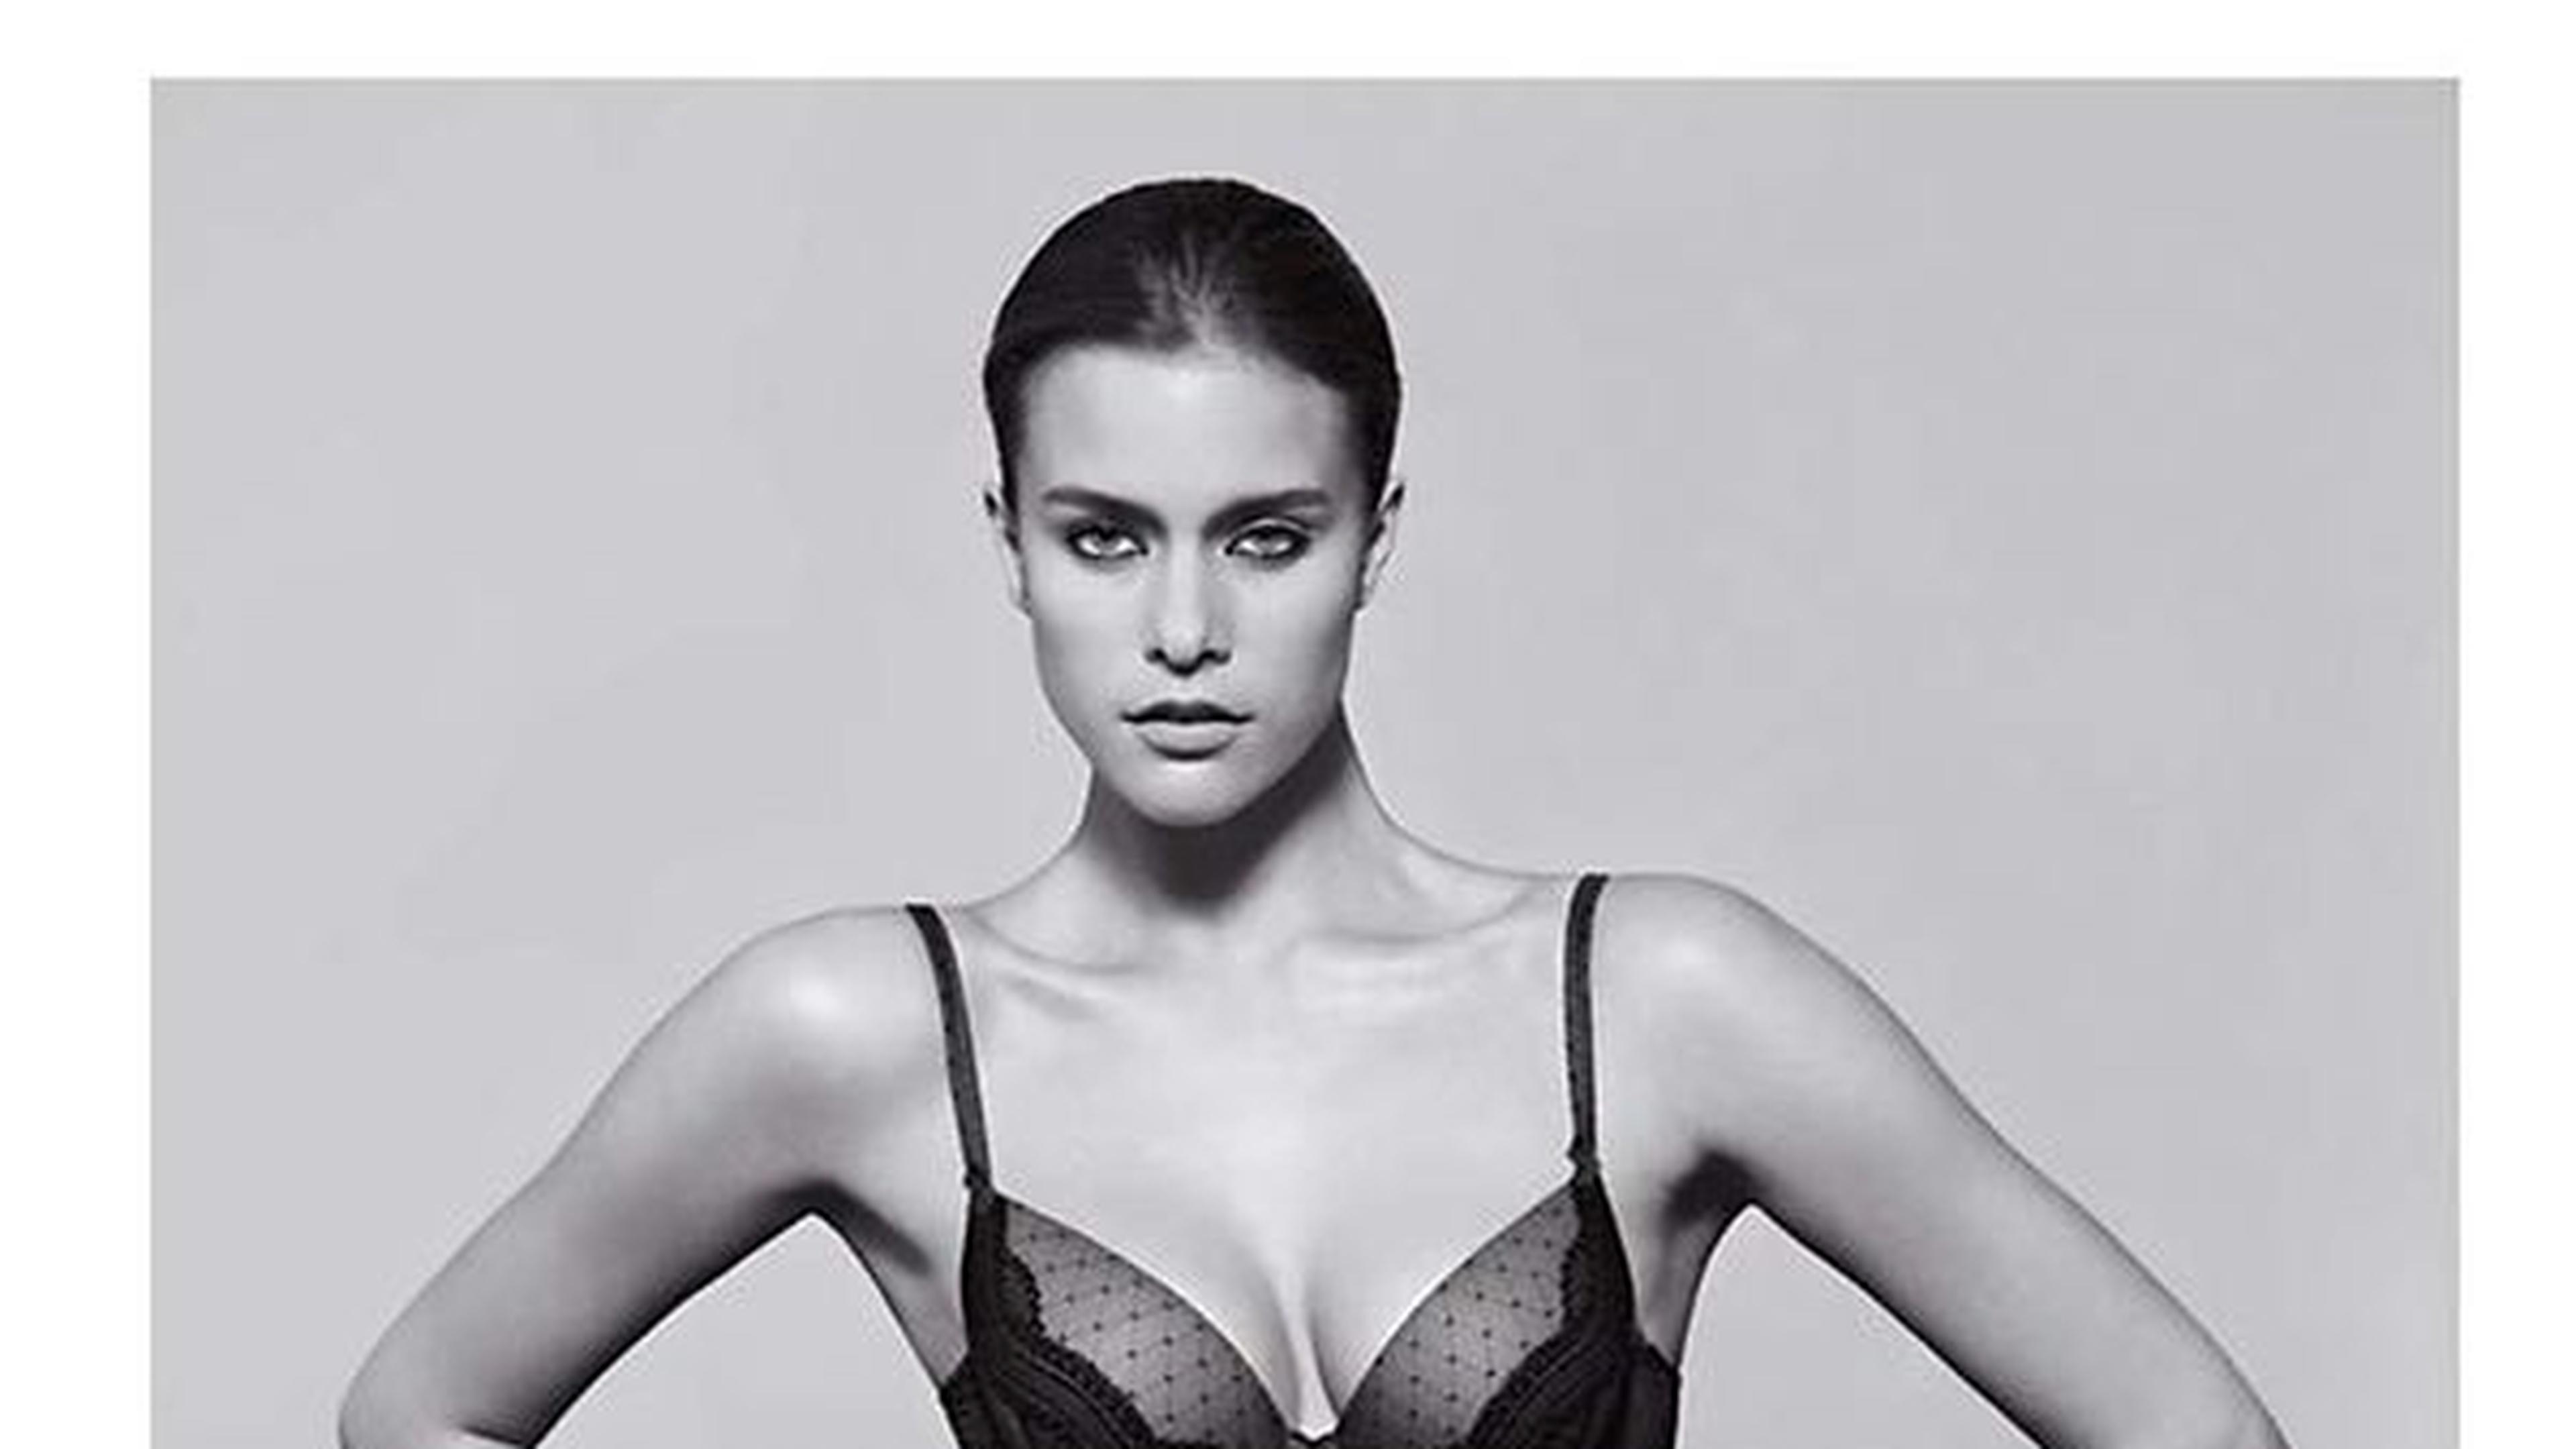 Online lingerie shop moves HQ to Luxembourg